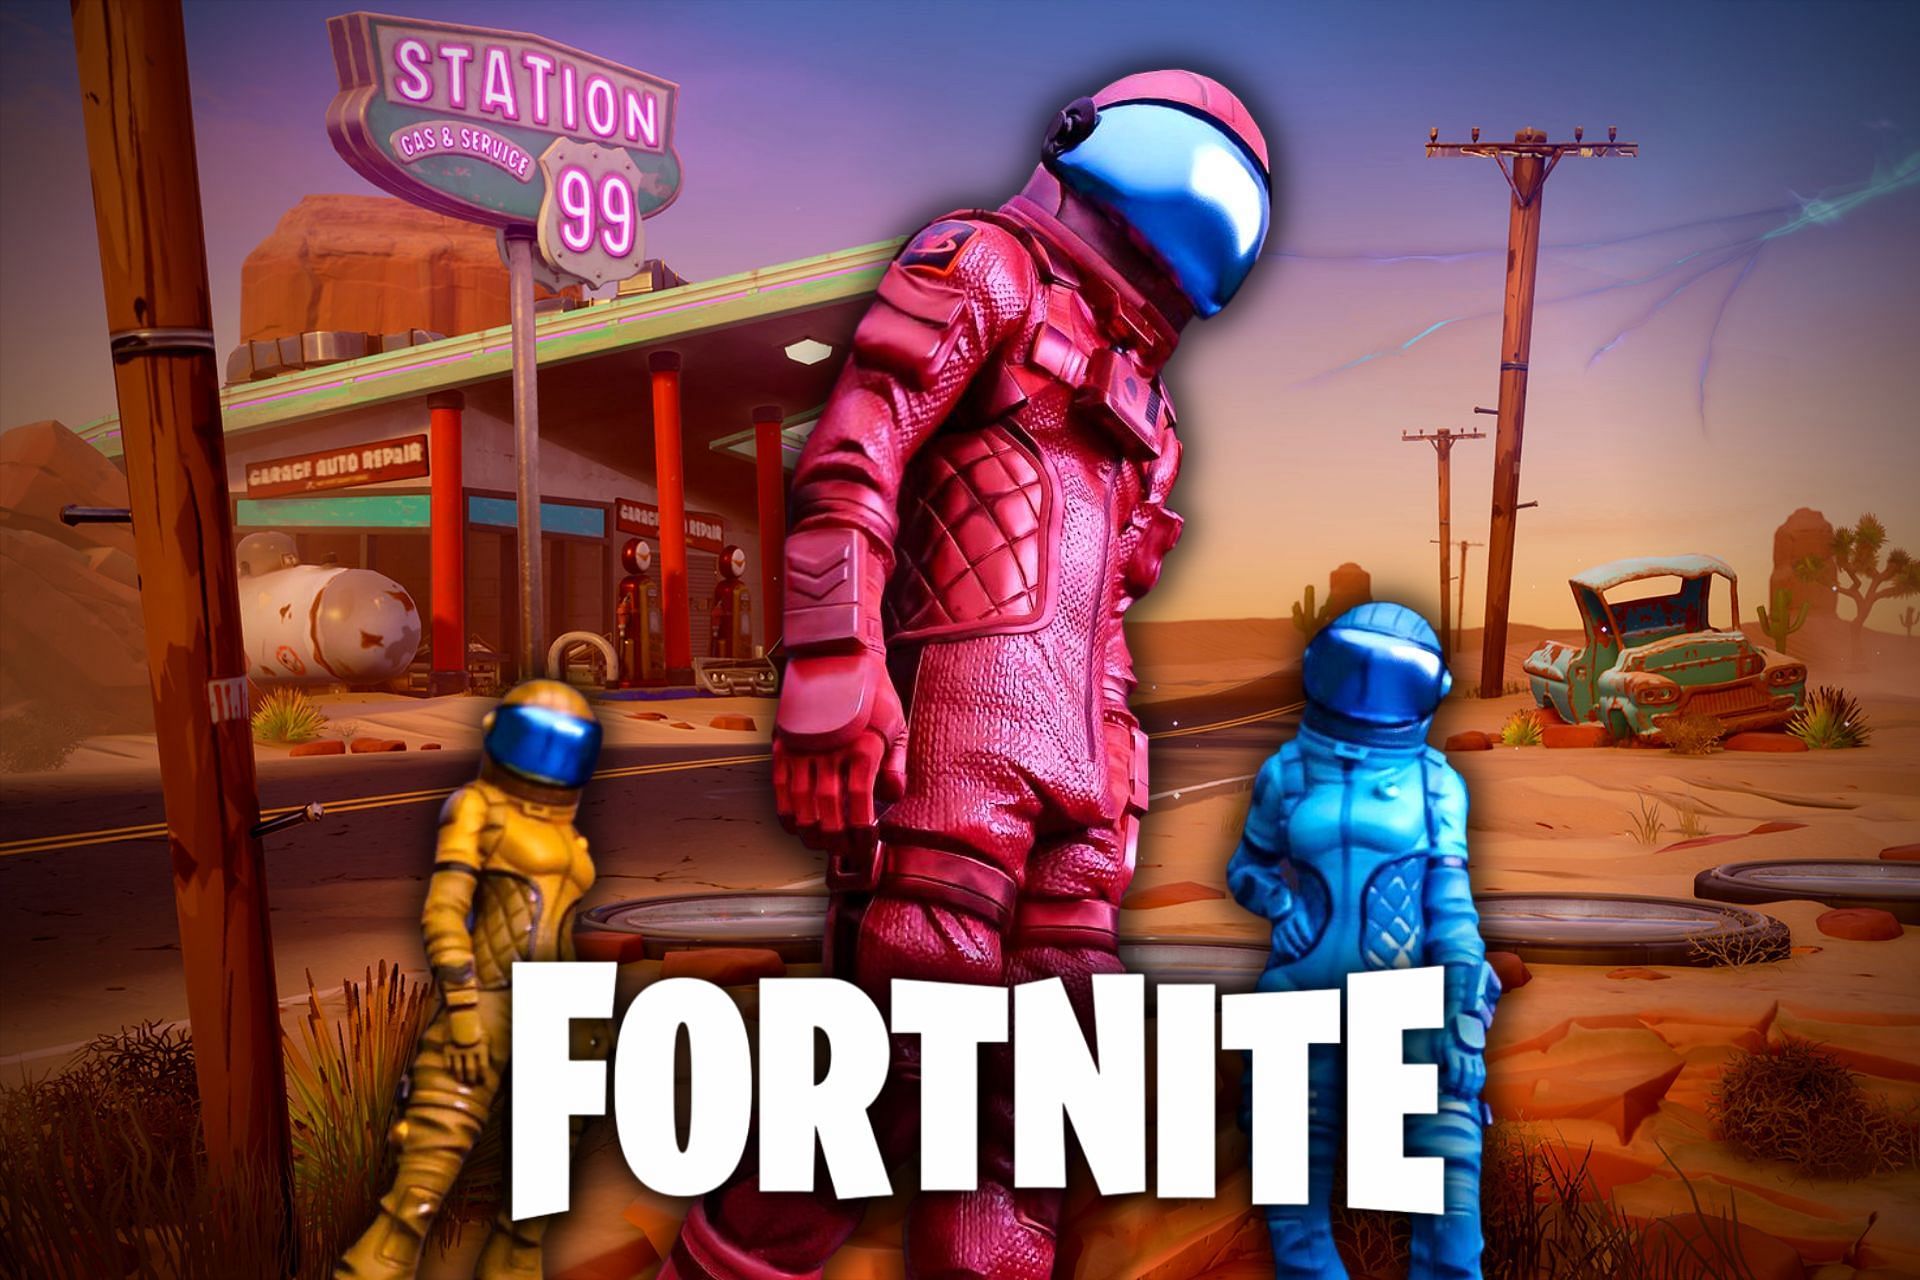 A bigger collaboration between Fortnite and Among Us will be coming soon (Image via Sportskeeda)